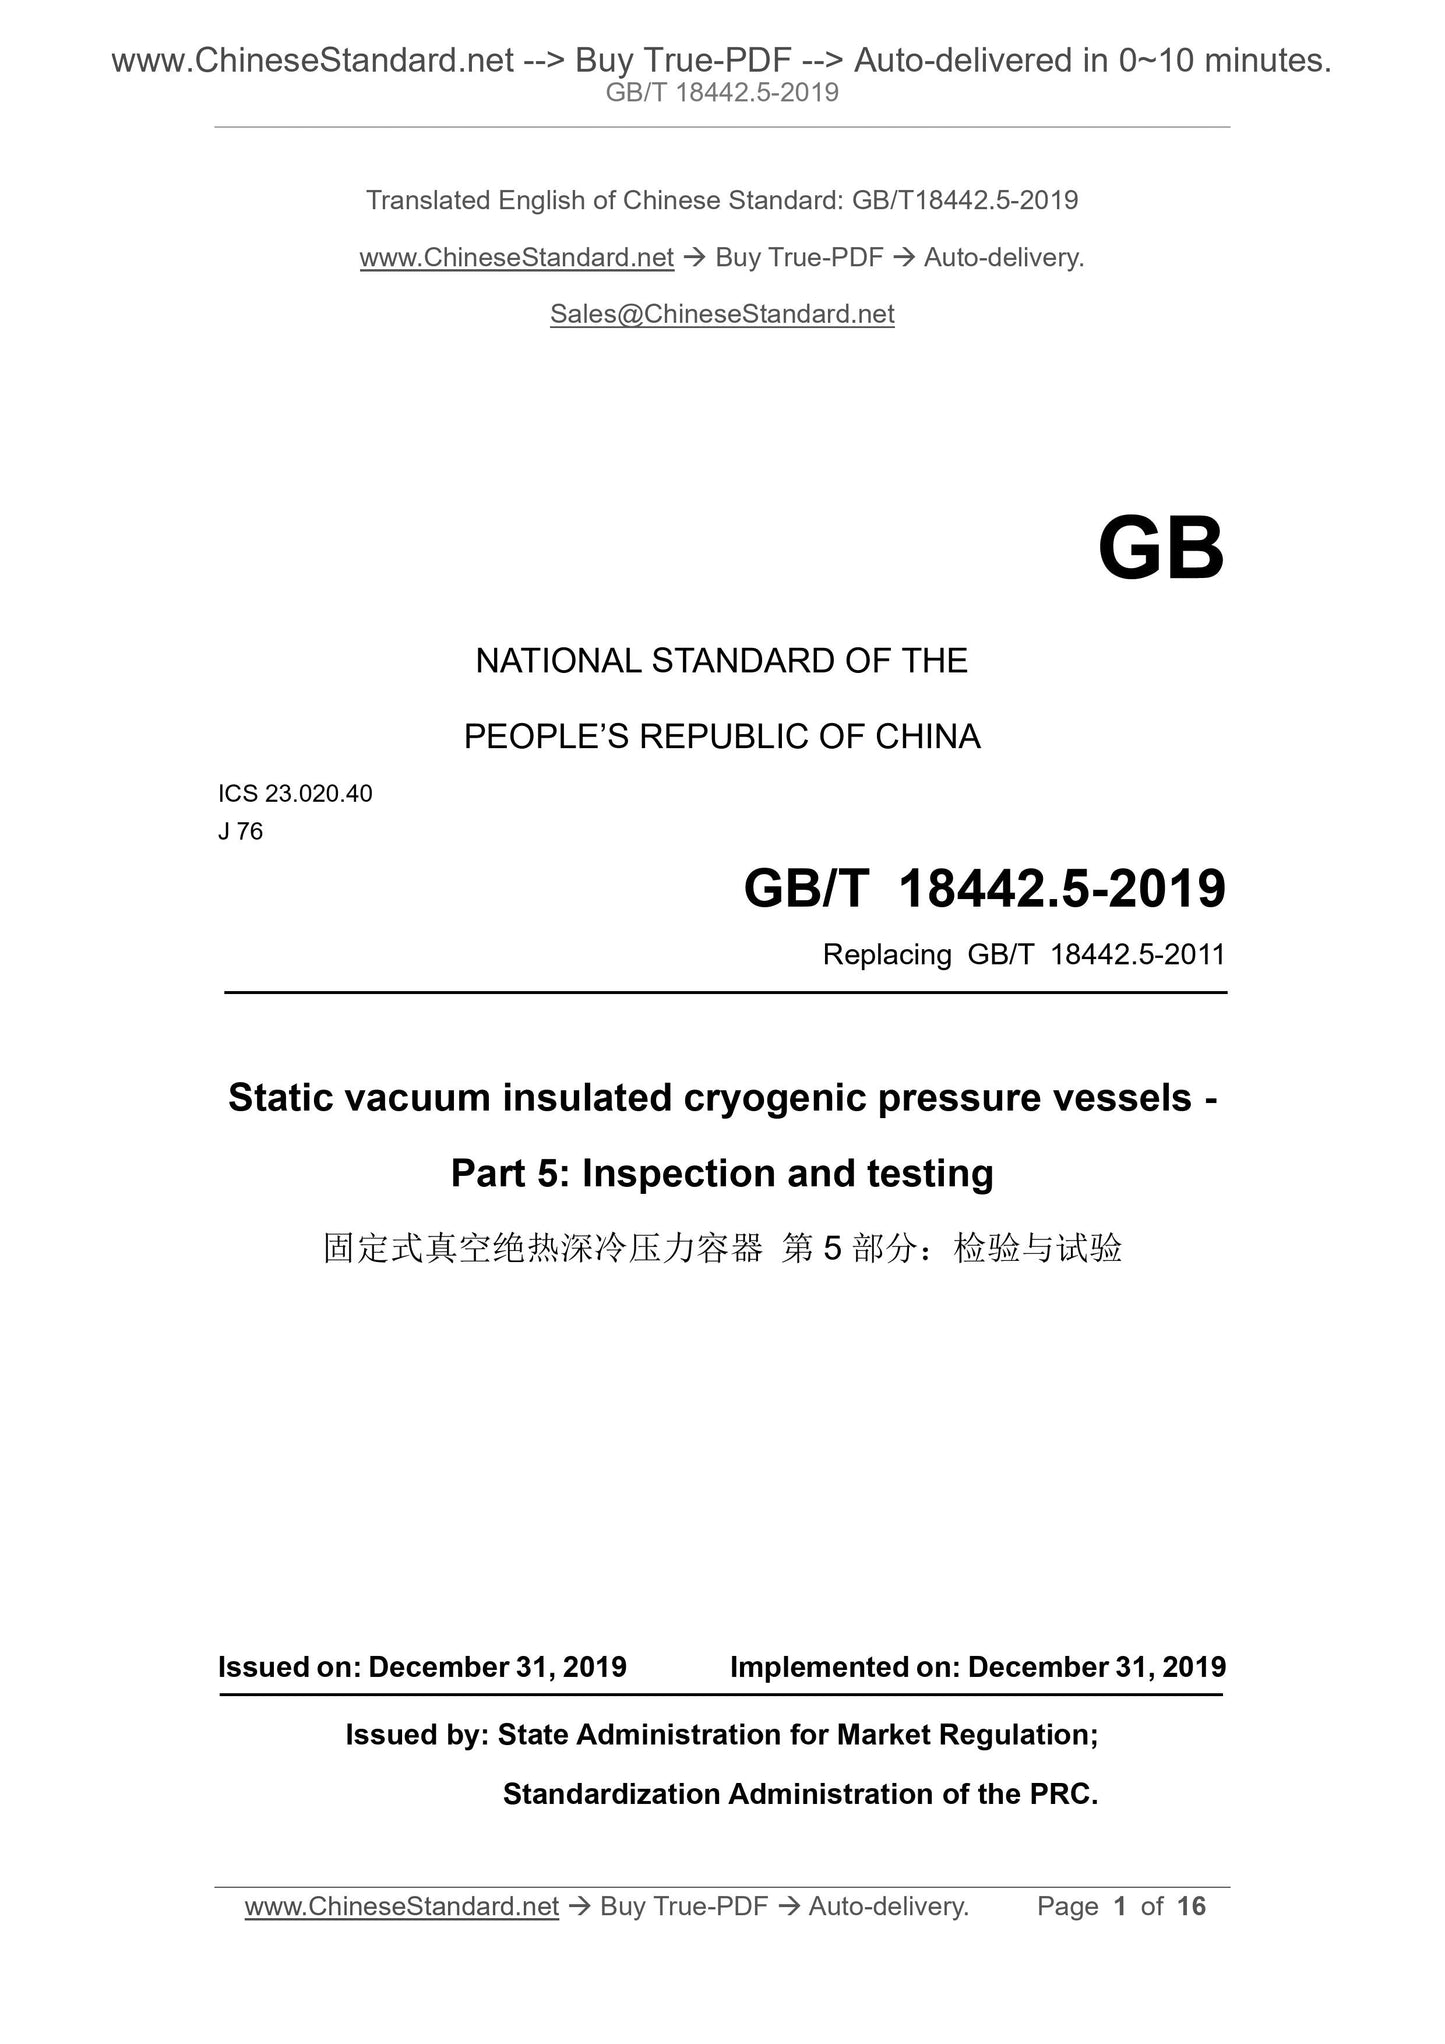 GB/T 18442.5-2019 Page 1